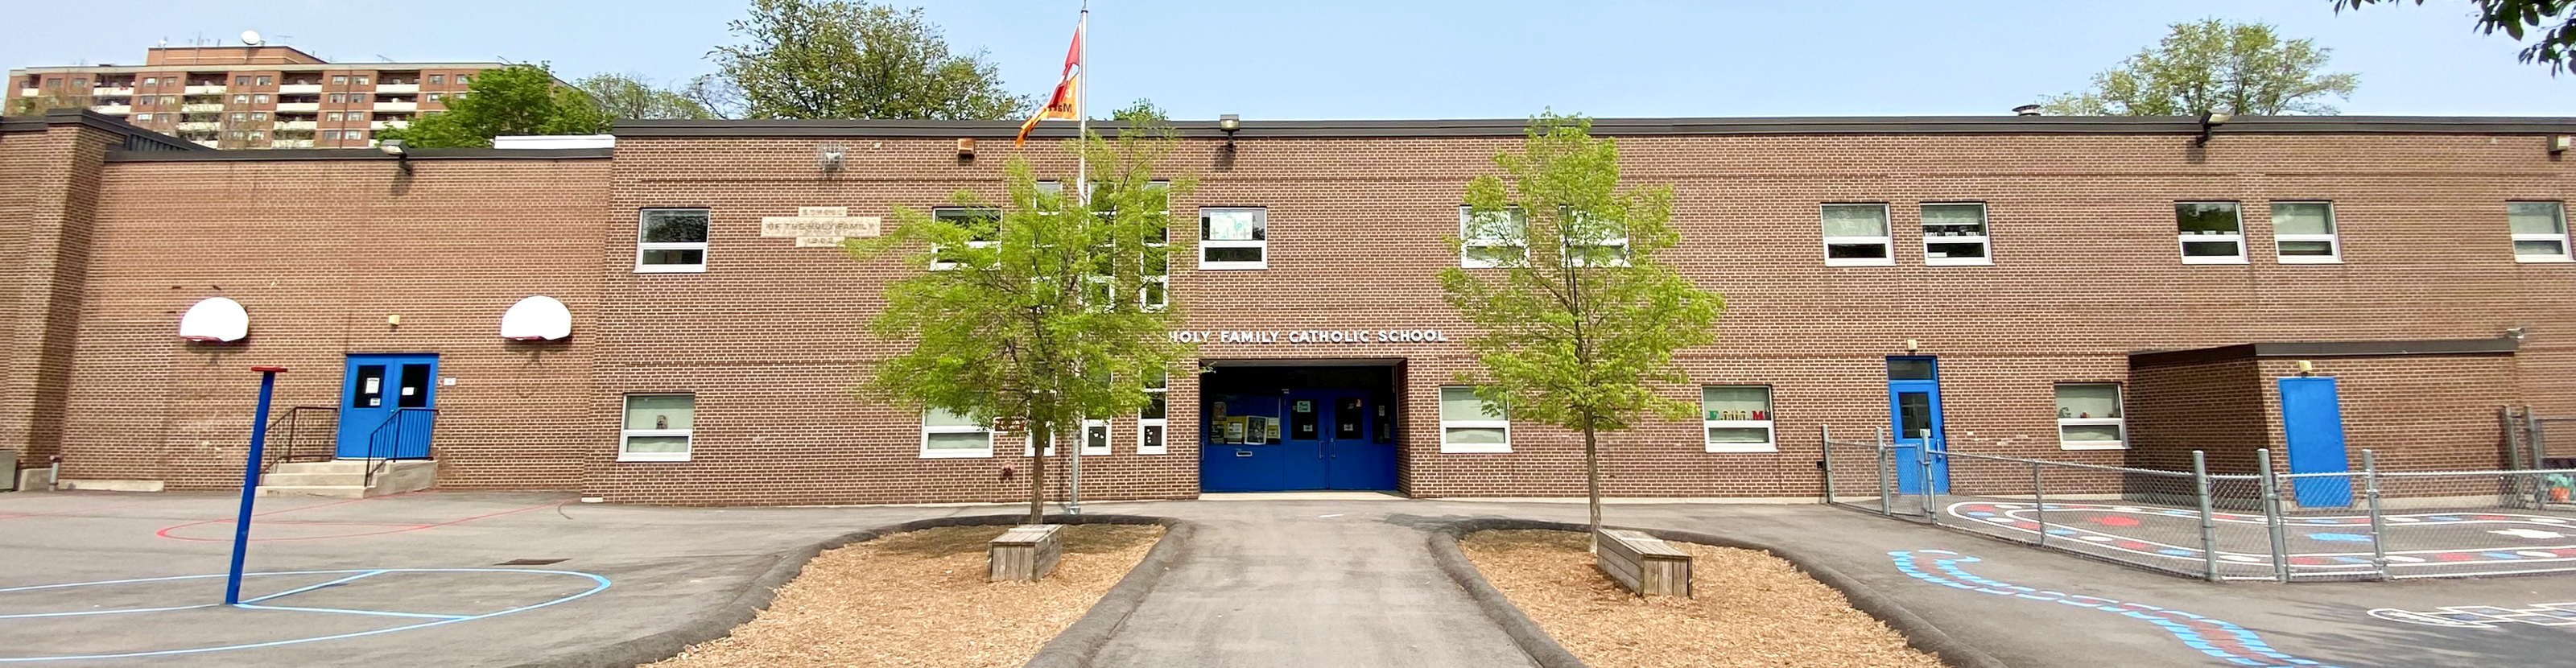 The front of the Holy Family Catholic School building.